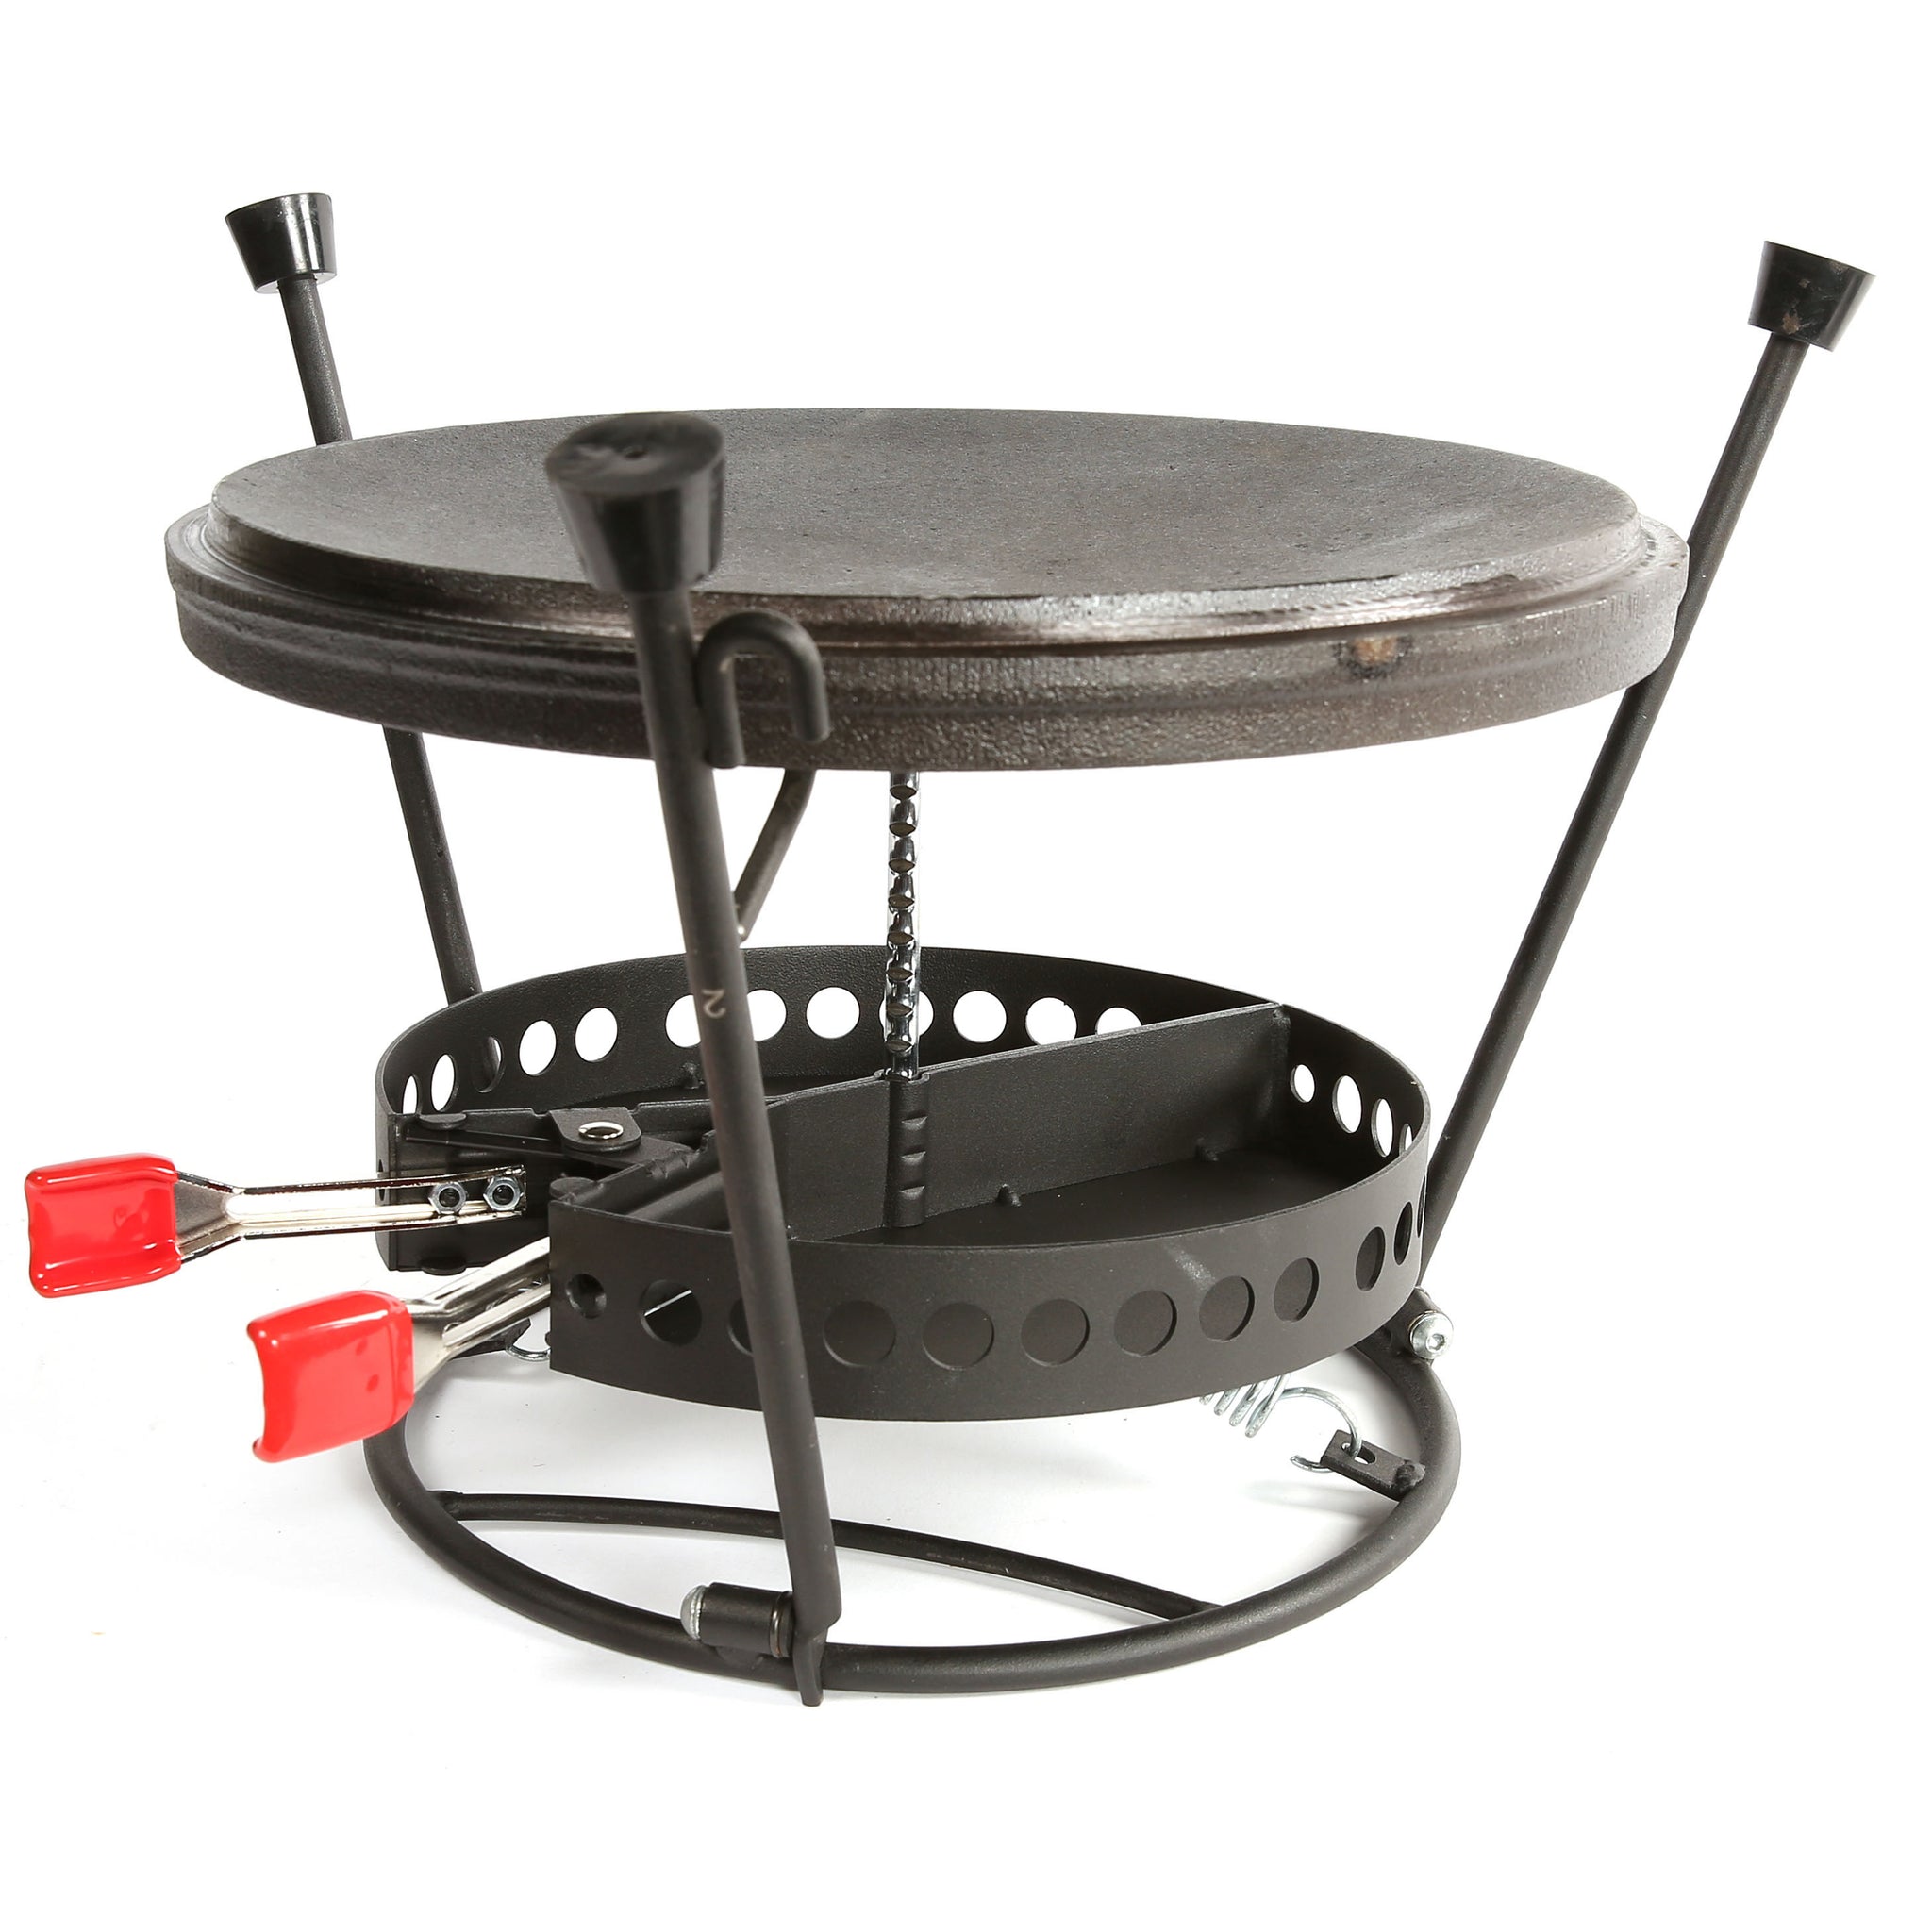 Campmaid 2 Piece Combo - Lid Lifter | Charcoal Holder